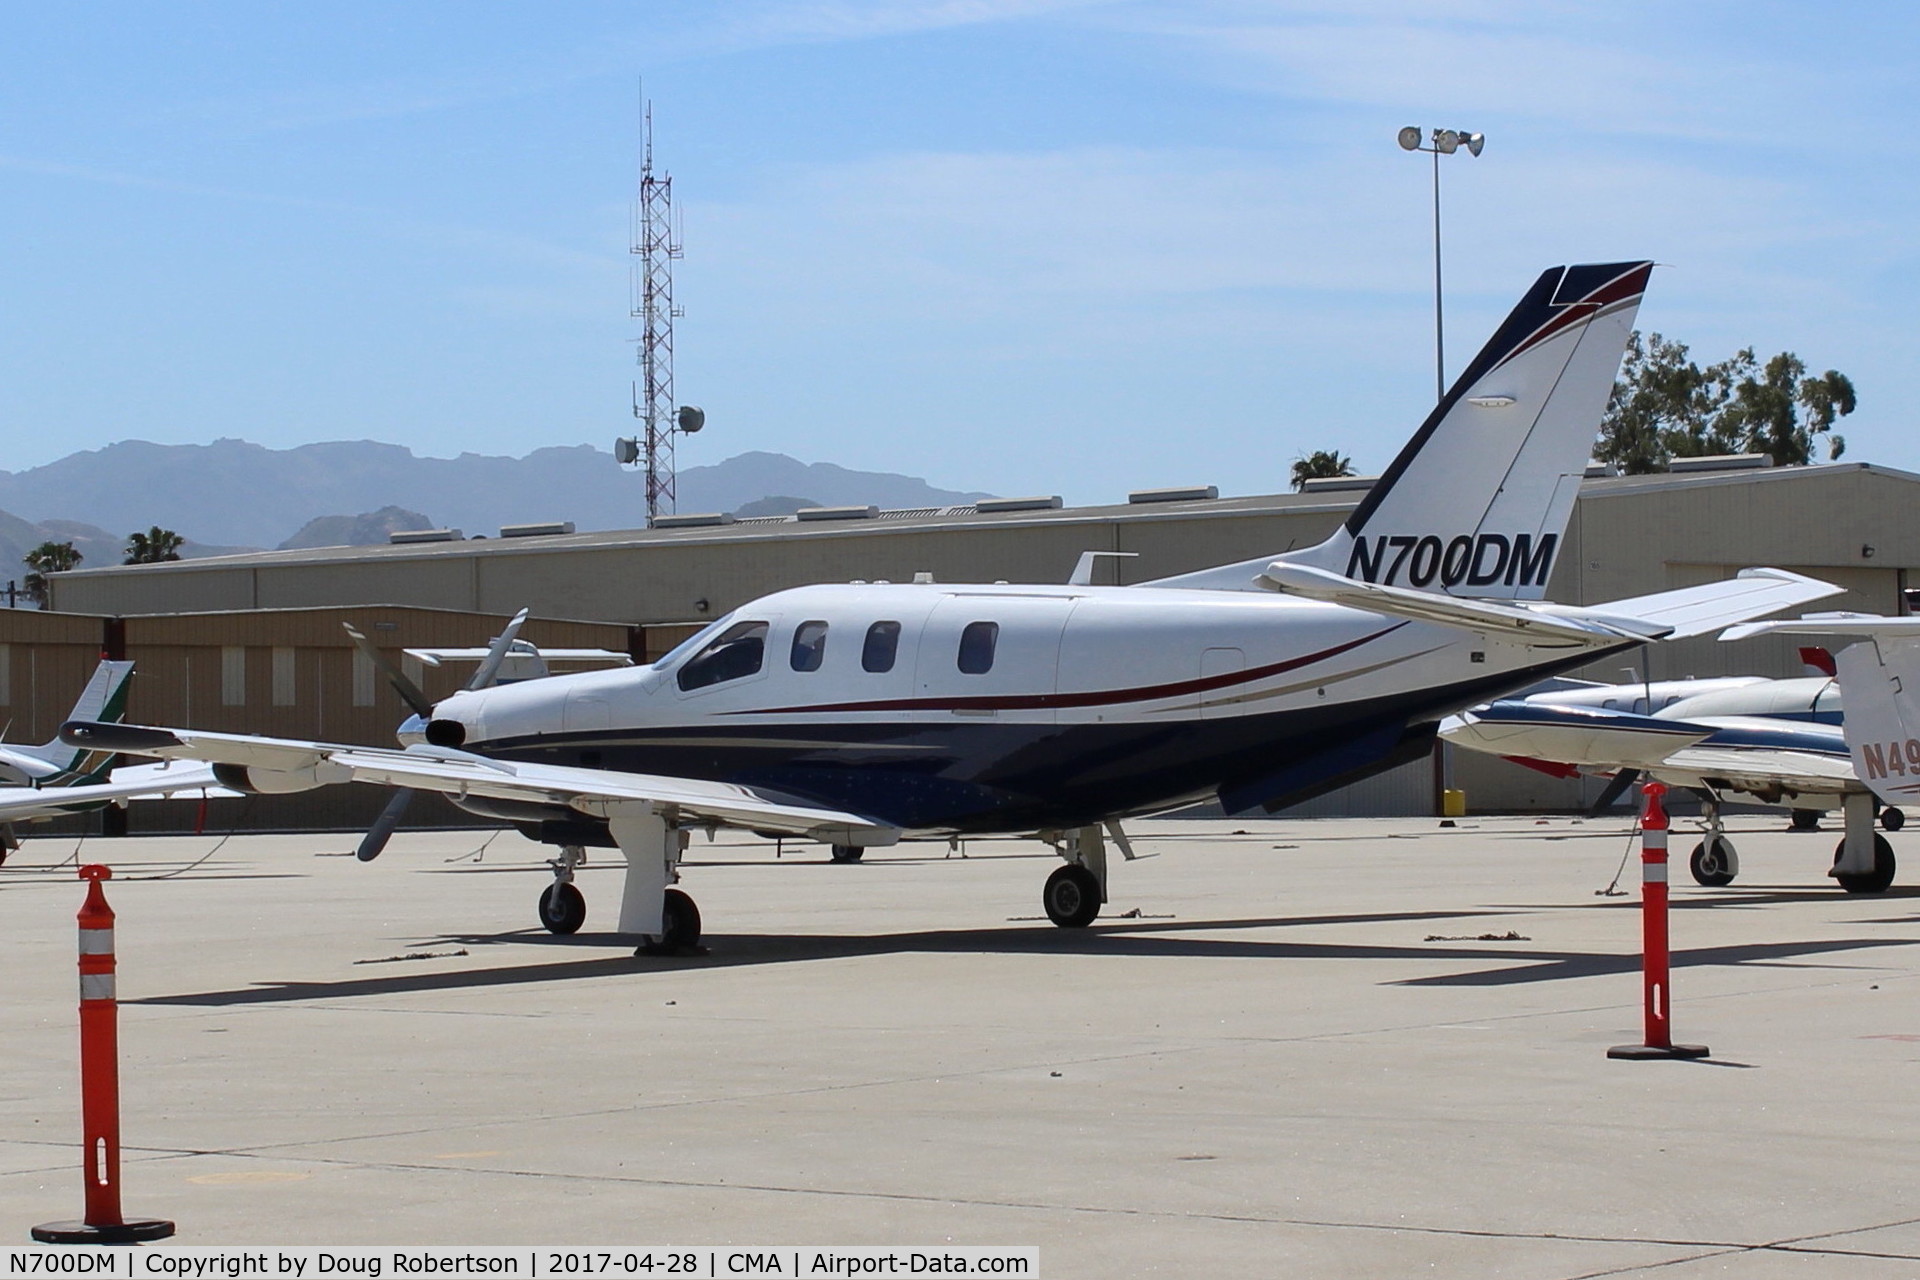 N700DM, 2004 Socata TBM-700 C/N 305, 2004 Socata TBM 700, one P&W(C)PT6A-64 700 sHp, 747 esHp, at AOPA Fly-In